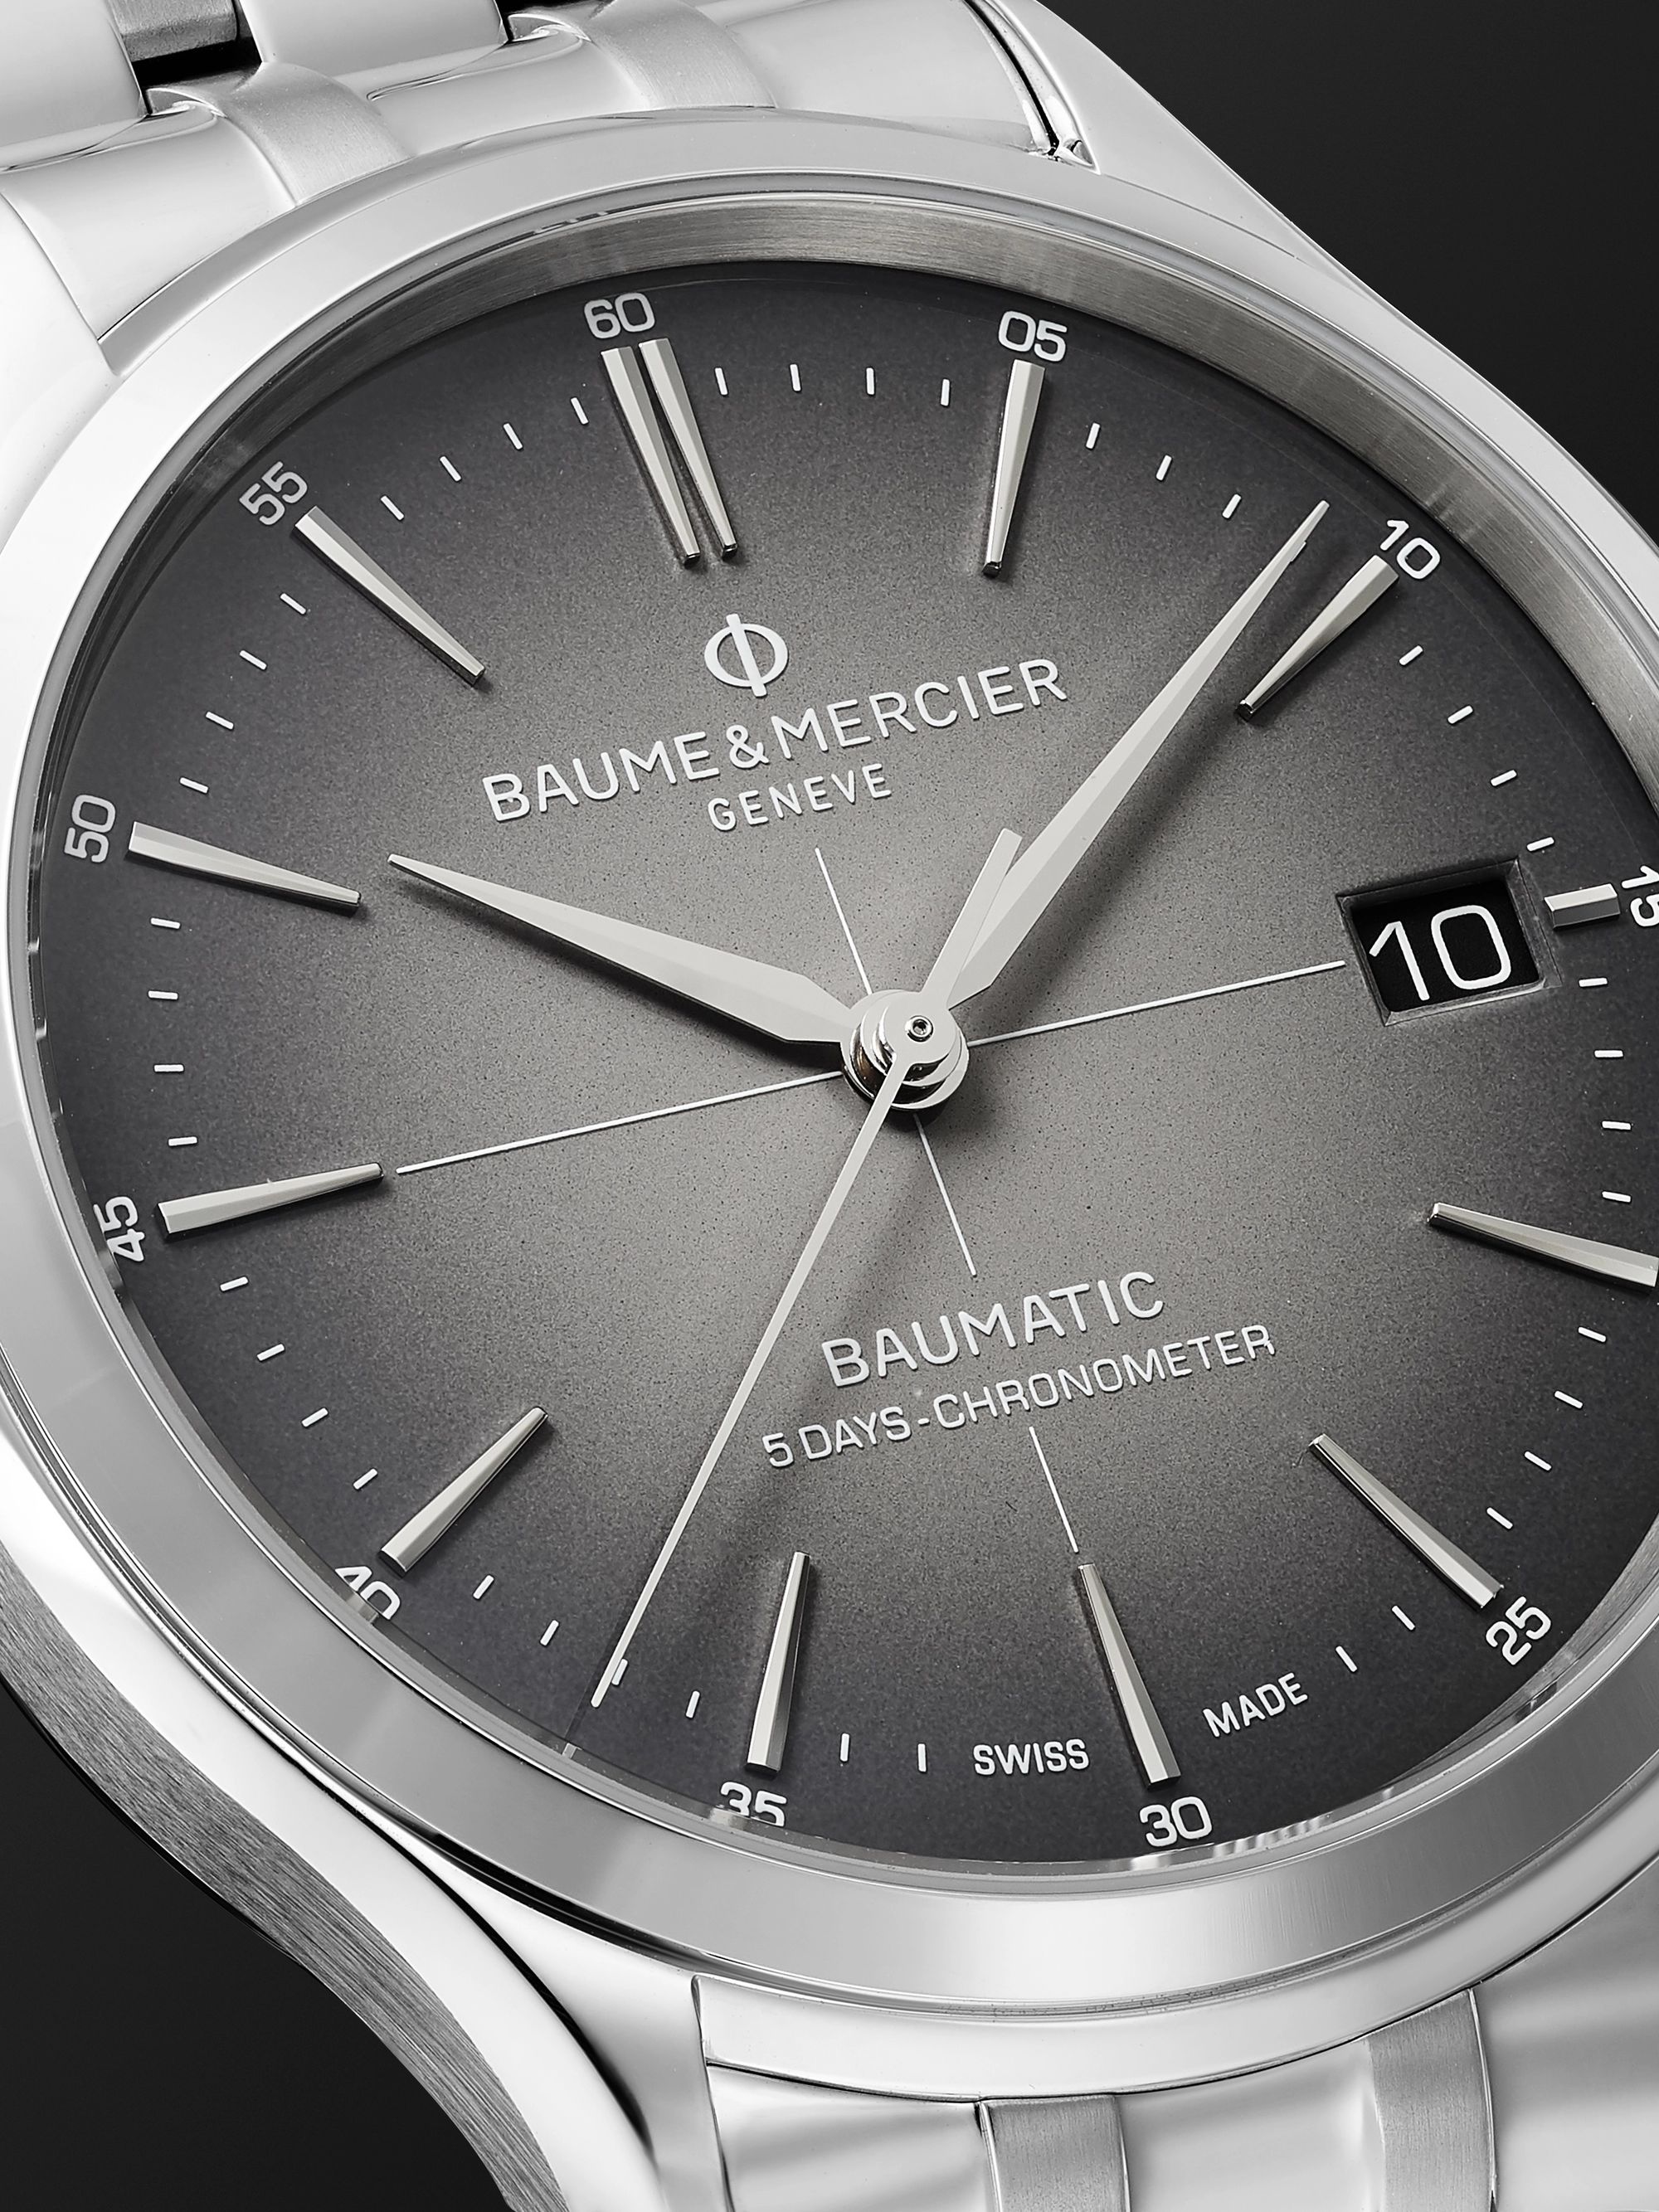 BAUME & MERCIER Clifton Baumatic Automatic Chronometer 40mm Stainless Steel Watch, Ref. No. M0A10551